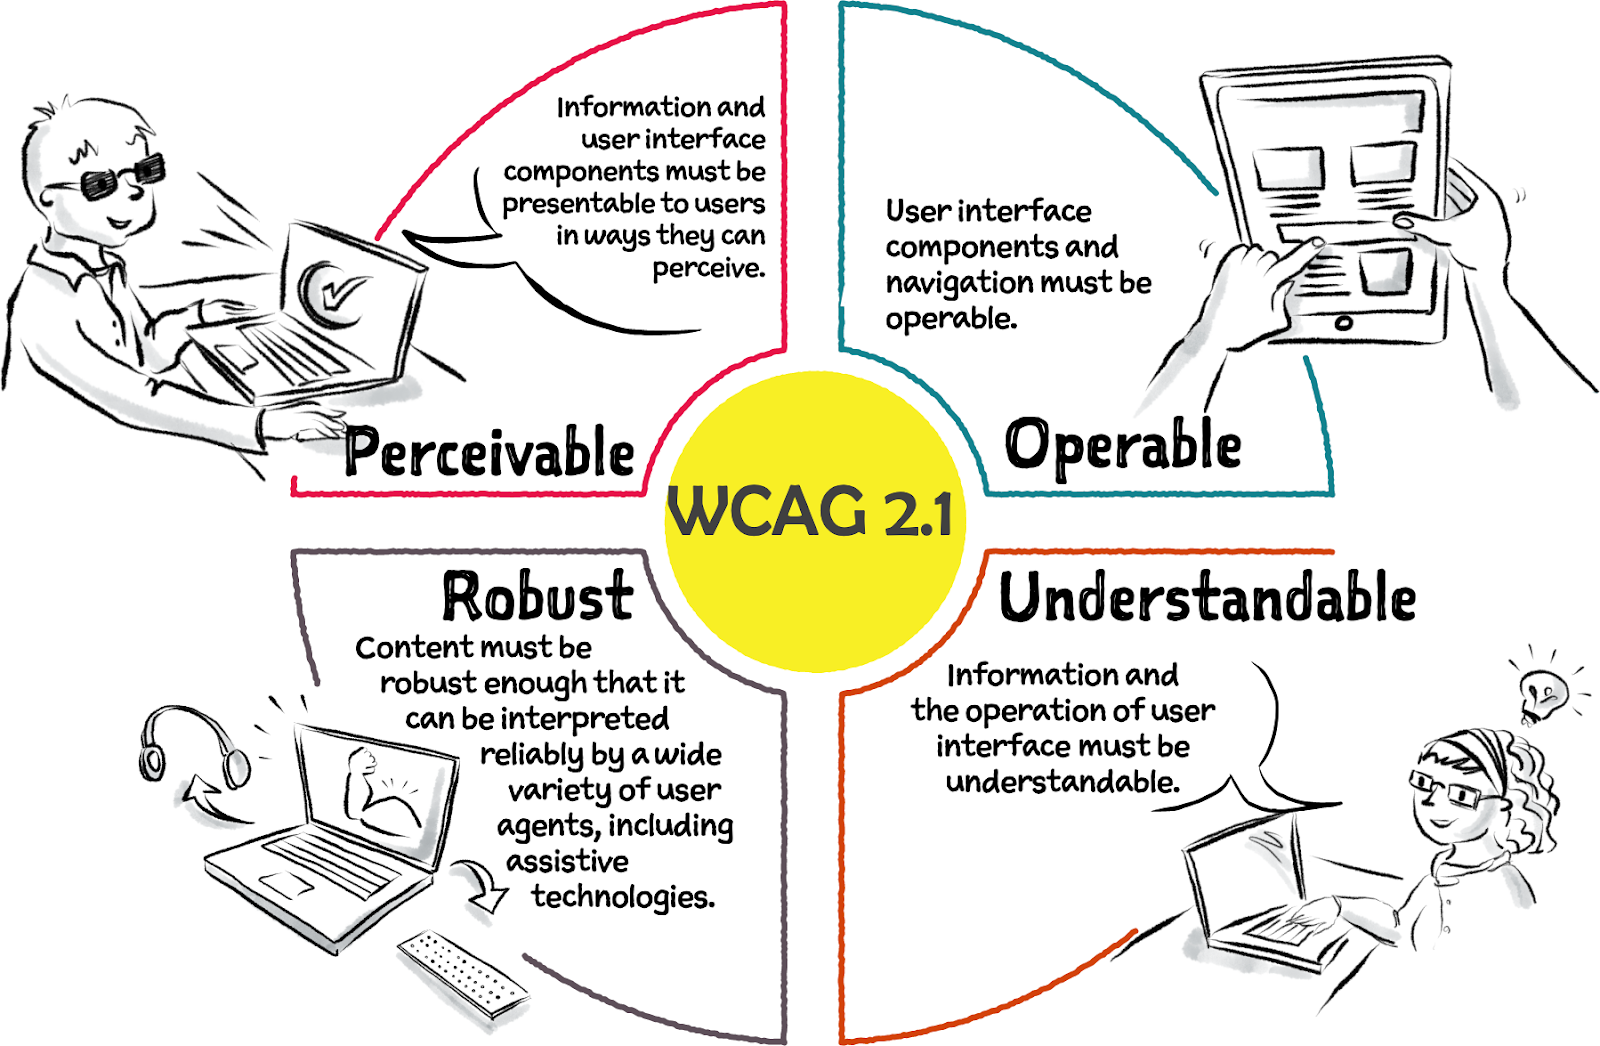 WCAG Map - In the center it says WCAG 2.1 and is surrounded by Perceivable, Operable, Robust and Understandable. Perceivable has a cartoon blind user and is defined as Information and user interface components must be presentable to users in ways they can perceive. Operable has a picture of two hands using a tablet computer and is defined as User interface components and navigation must be operable. Robust has an image of a laptop, headphones and braille display connected by arrows and is defined as Content must be robust enough that it can be interpreted reliably by a wide variety of user agents, including assistive technologies. Understandable has a cartoon woman using a laptop with a light bulb above her head as if she had a good idea and is defined as Information and the operation of user interface must be understandable.